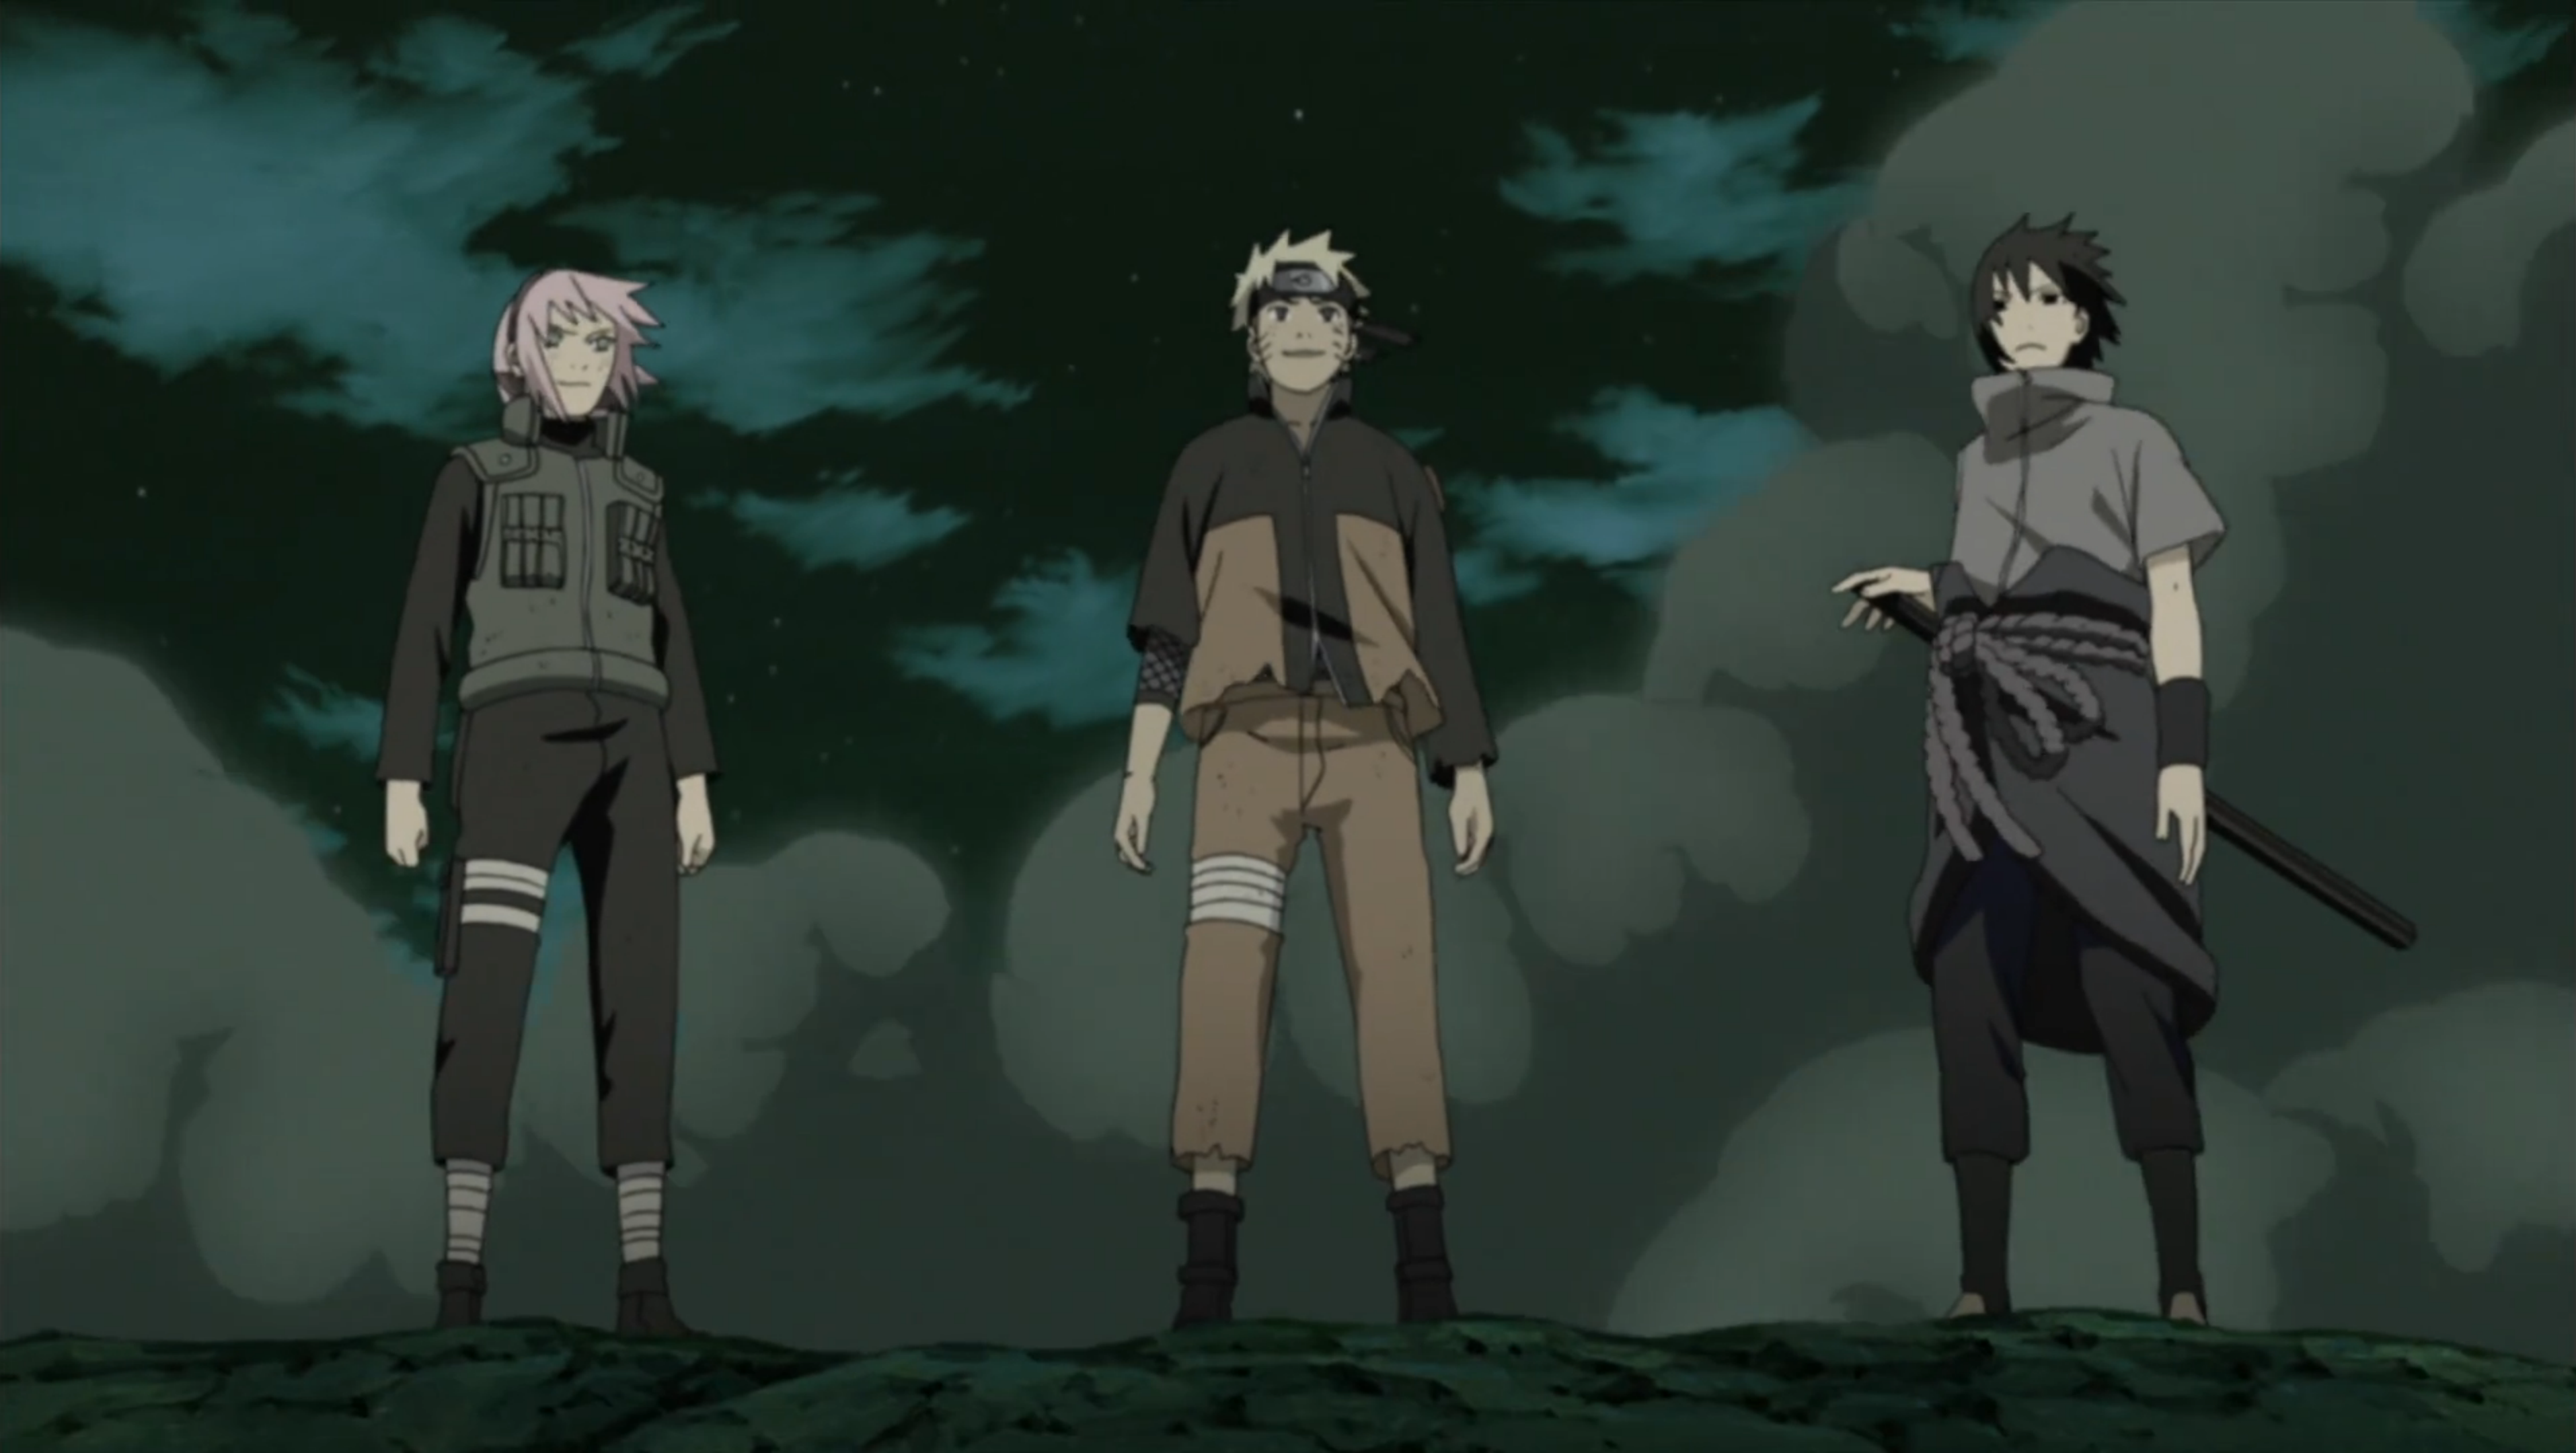 In Naruto Why was Naruto, Sasuke and Sakura chosen to be on team 7 when all  the other teams seemed to be chosen due to clan affiliation? - Quora